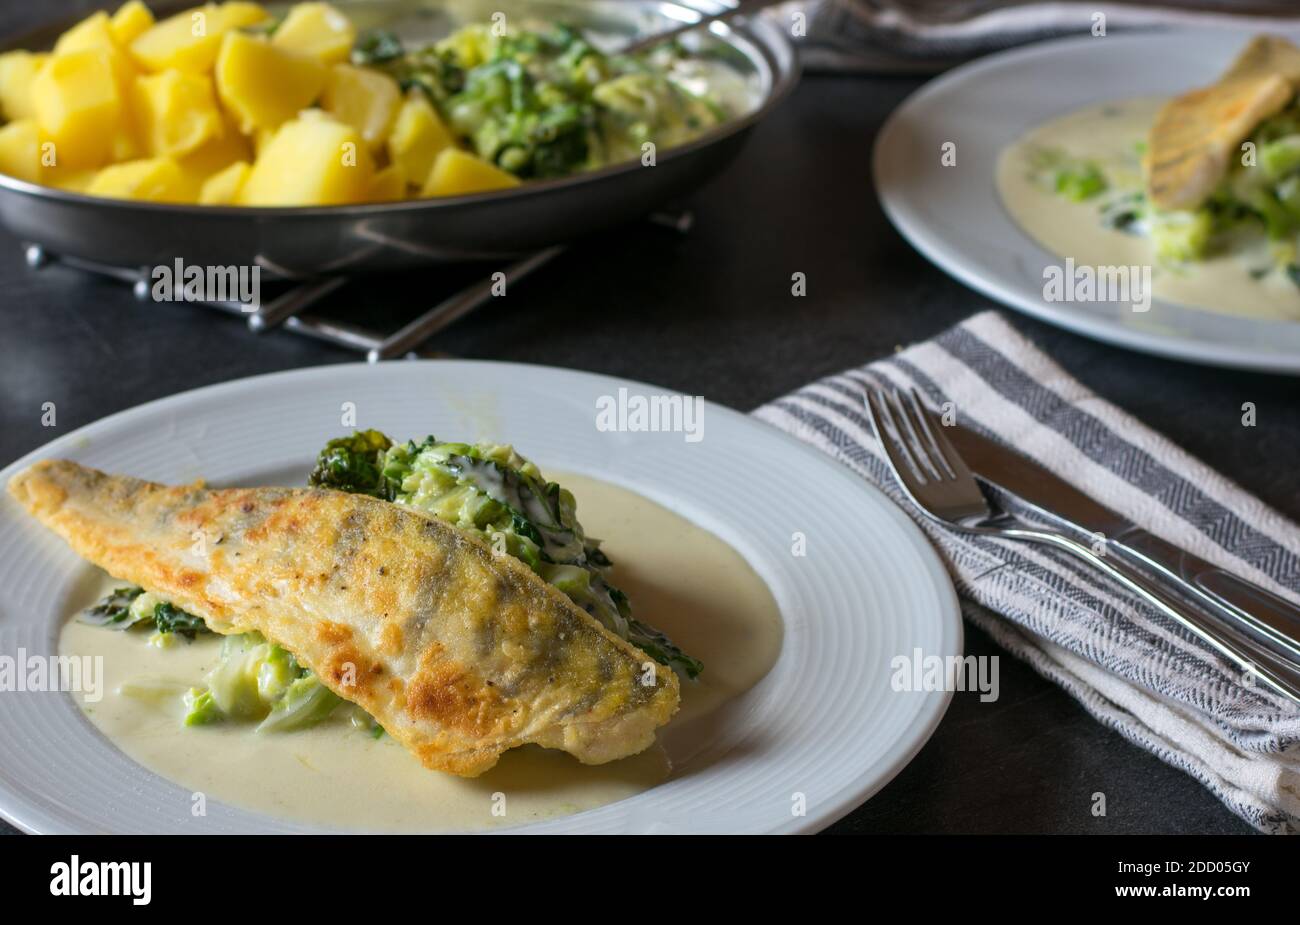 delicious fish dish with pike perch fillet, savoy vegetables, potatoes in a creamy beachamel sauce served on a kitchen table at home Stock Photo